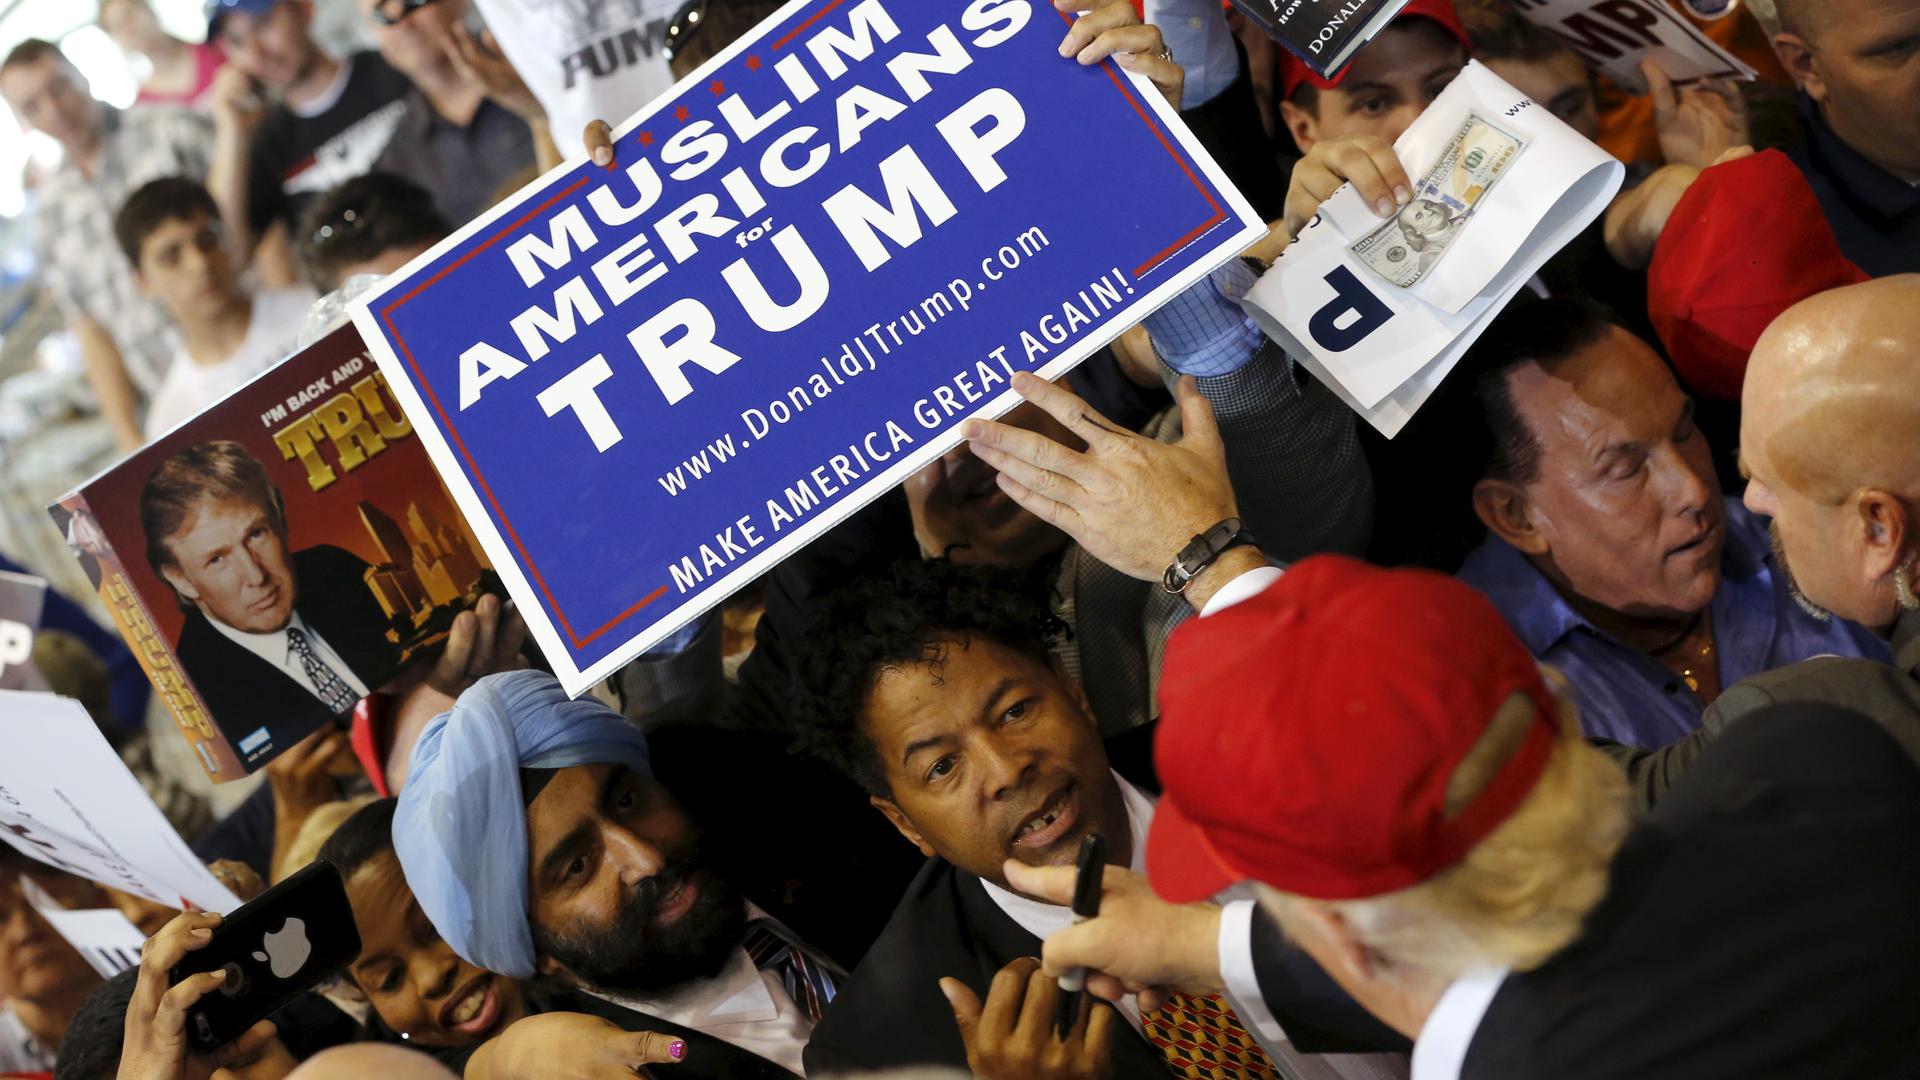 US Republican presidential candidate Donald Trump signs autographs for supporters holding a Muslim Americans for Trump sign after a rally in Harrington, Delaware April 22, 2016.